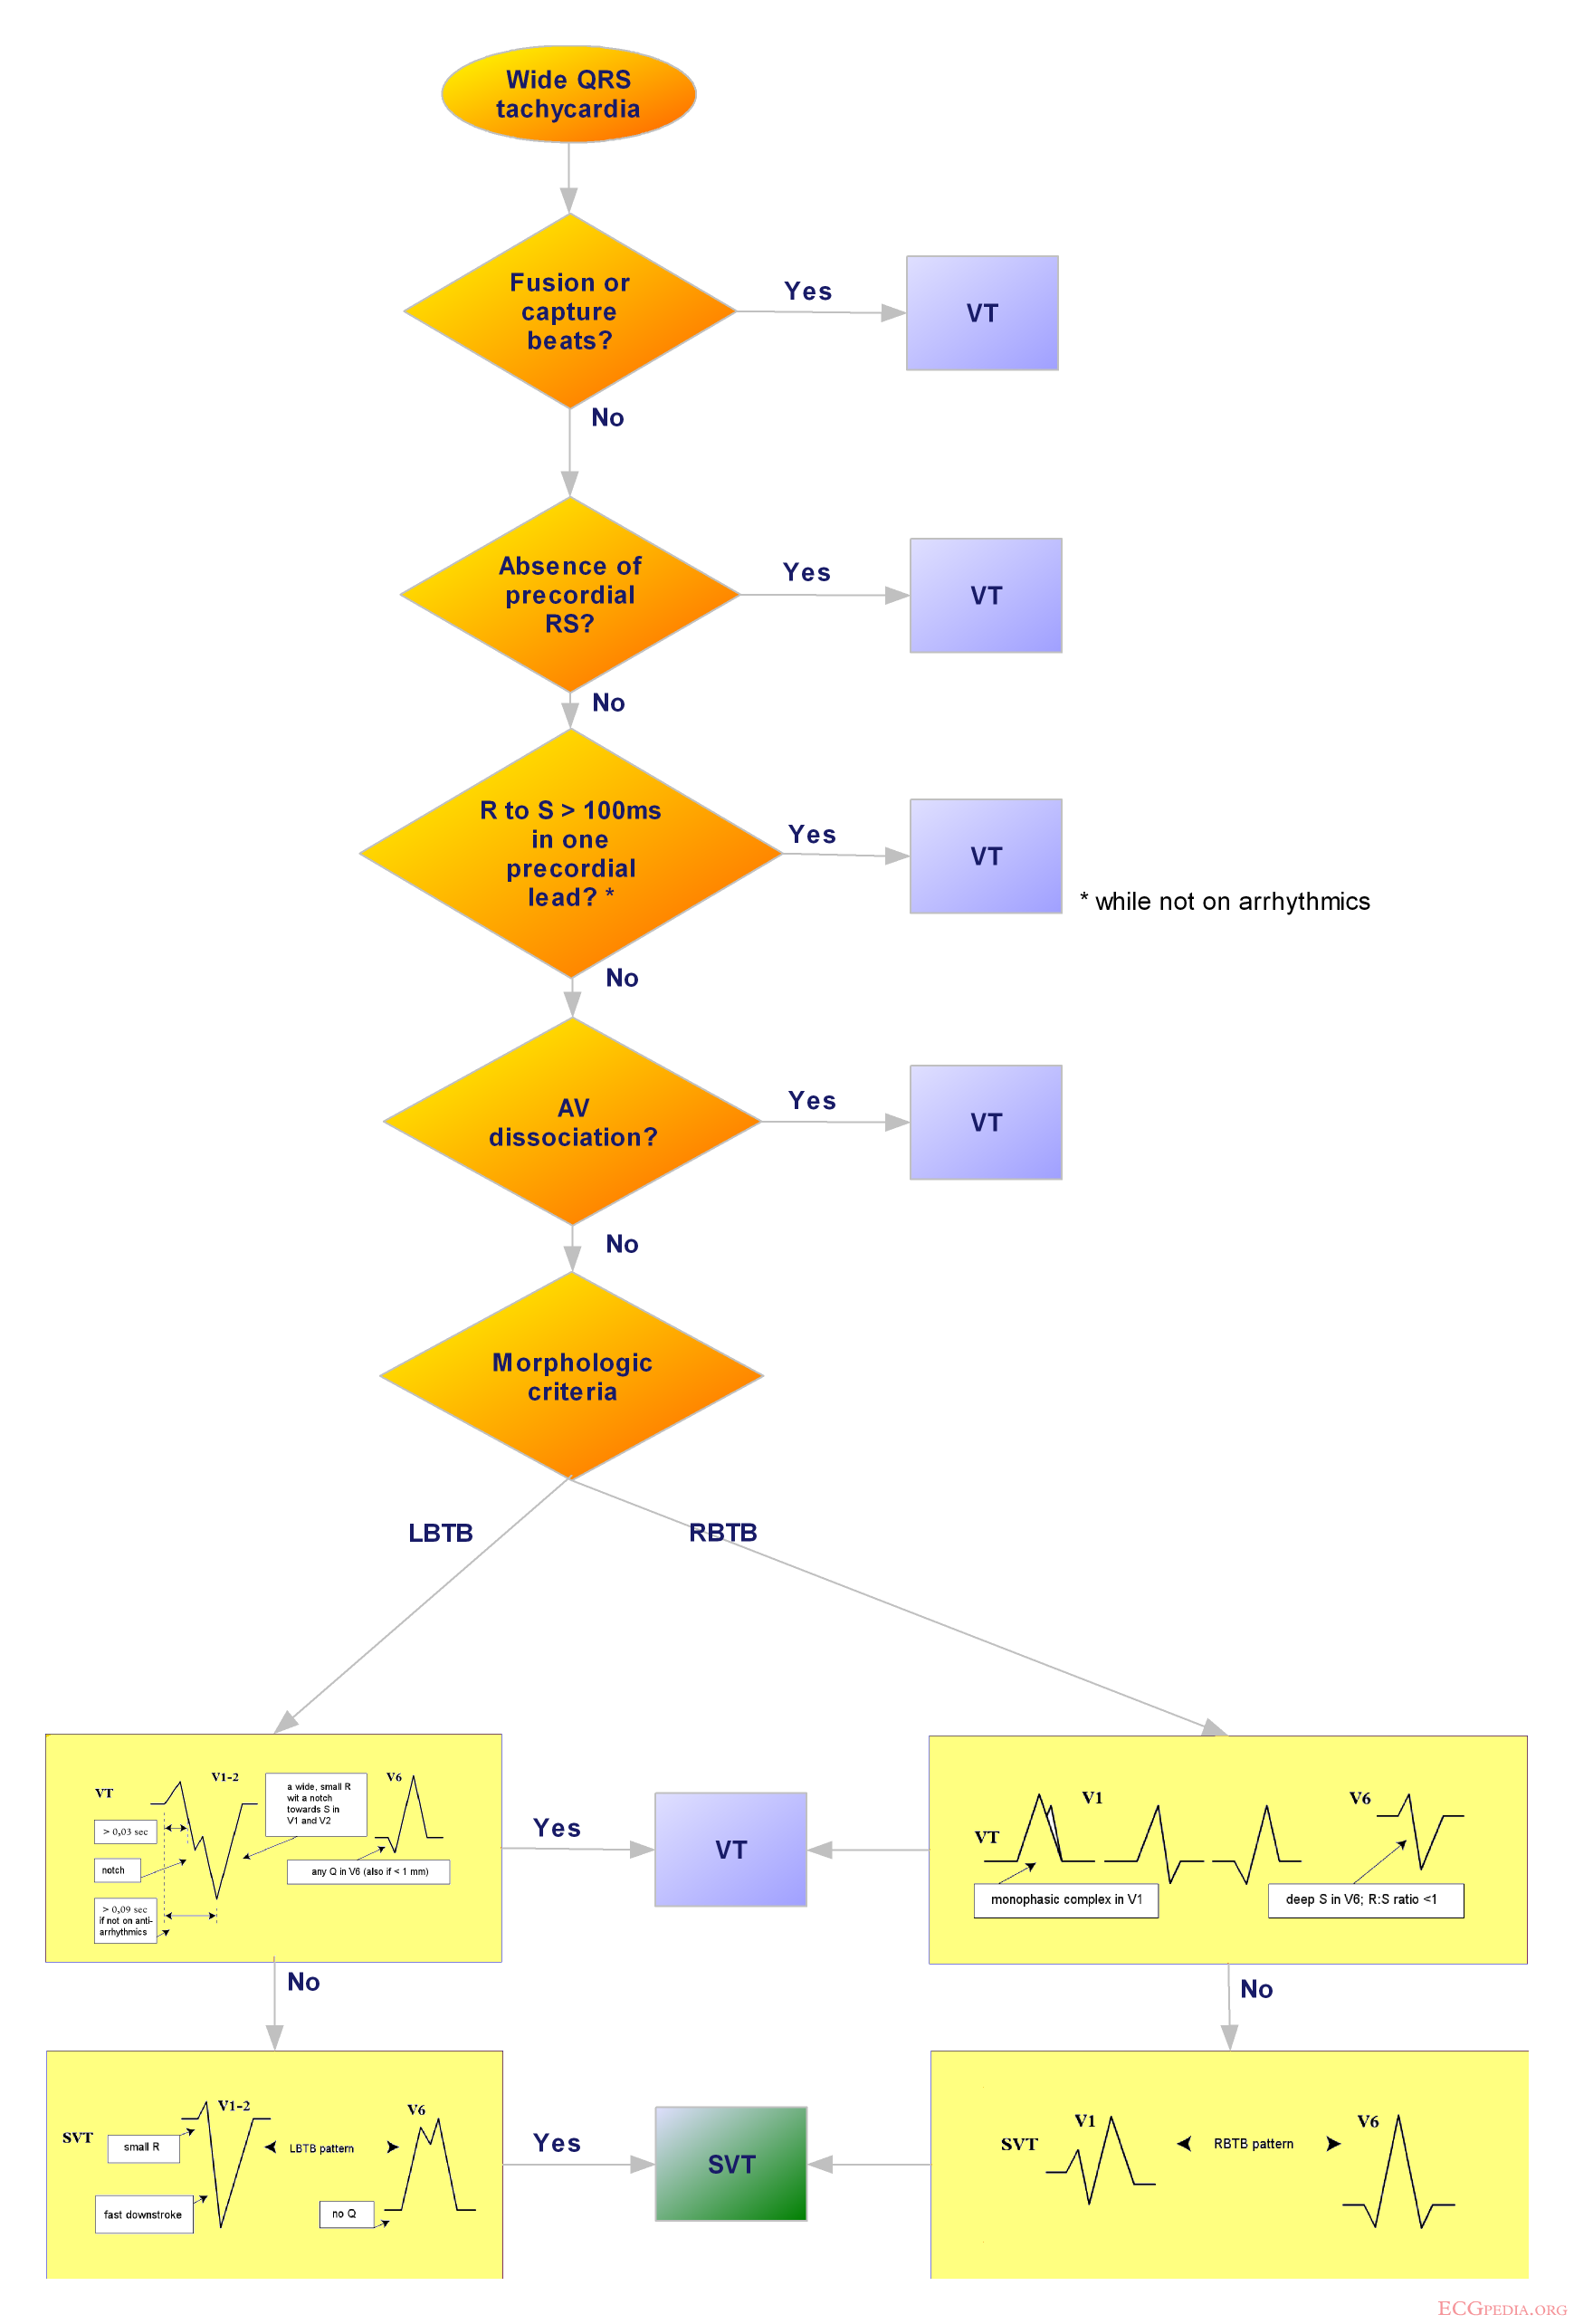 Flowchart of the approach to a wide complex tachycardia.